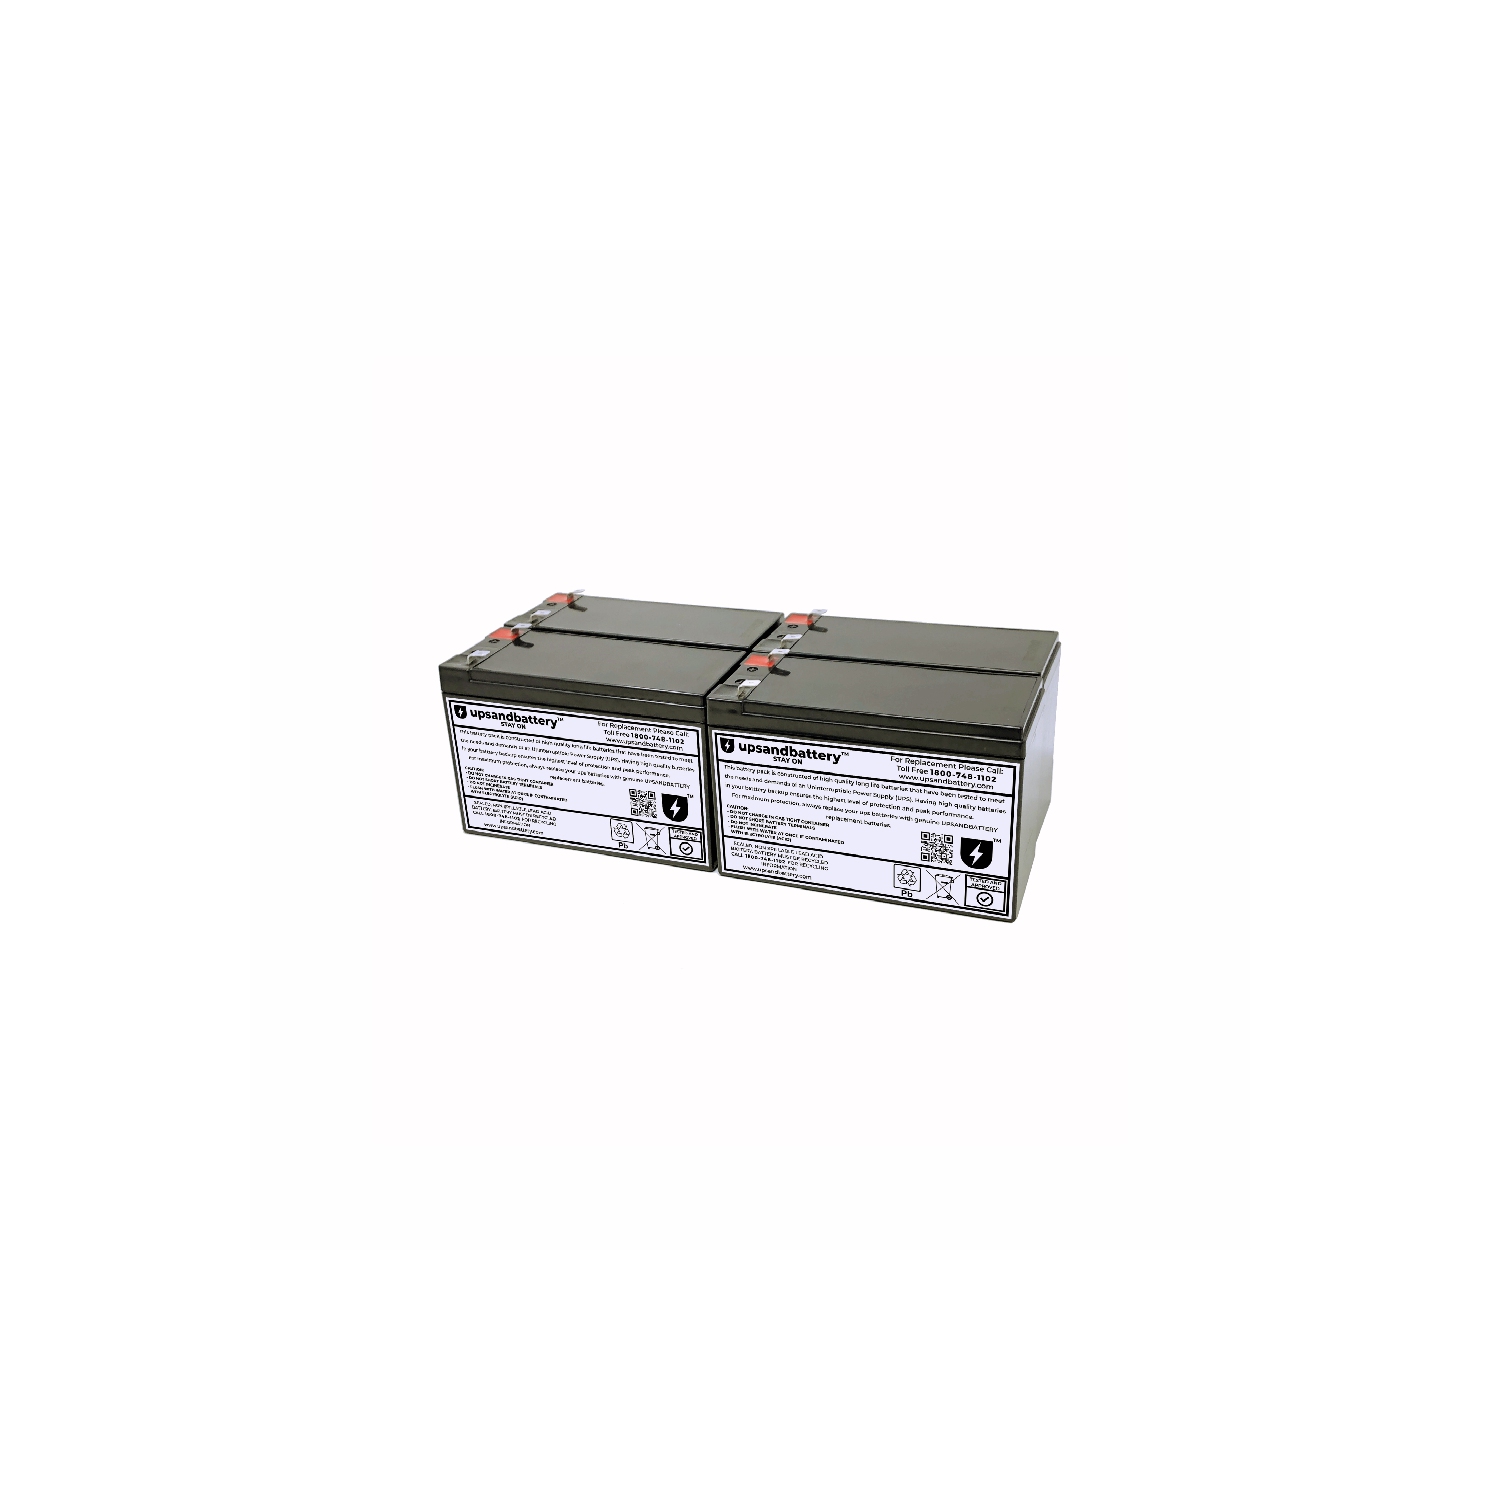 Eaton UPS Model Powerware PW9125-2000 Compatible - High-Rate Discharge Series Replacement Battery Backup Set - UPSANDBATTERY™